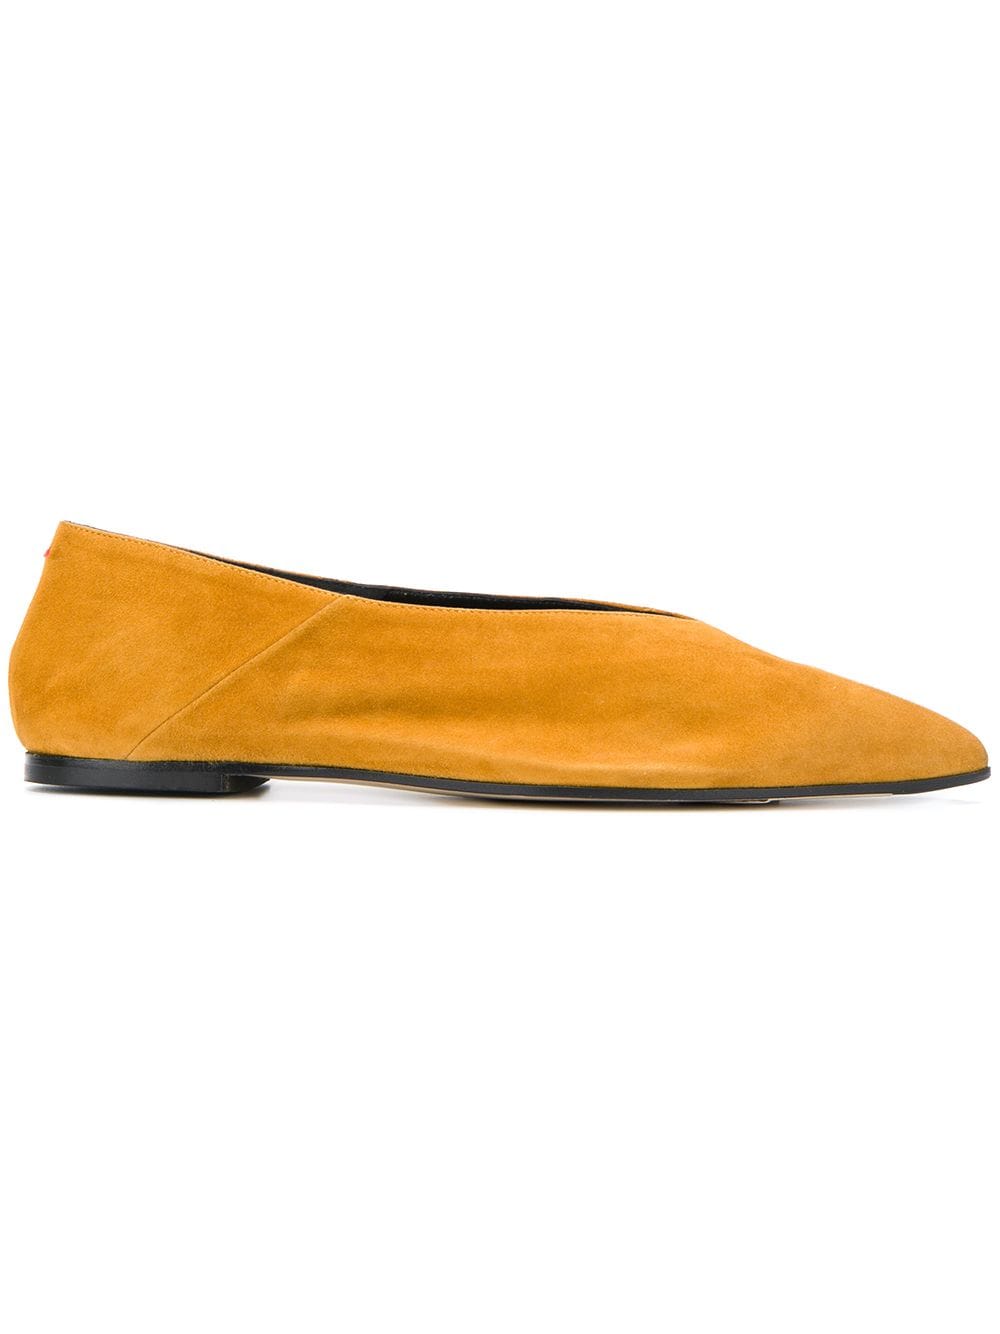 AEYDE AEYDE FLAT POINTED BALLERINA SHOES - YELLOW & ORANGE,MOA12912967